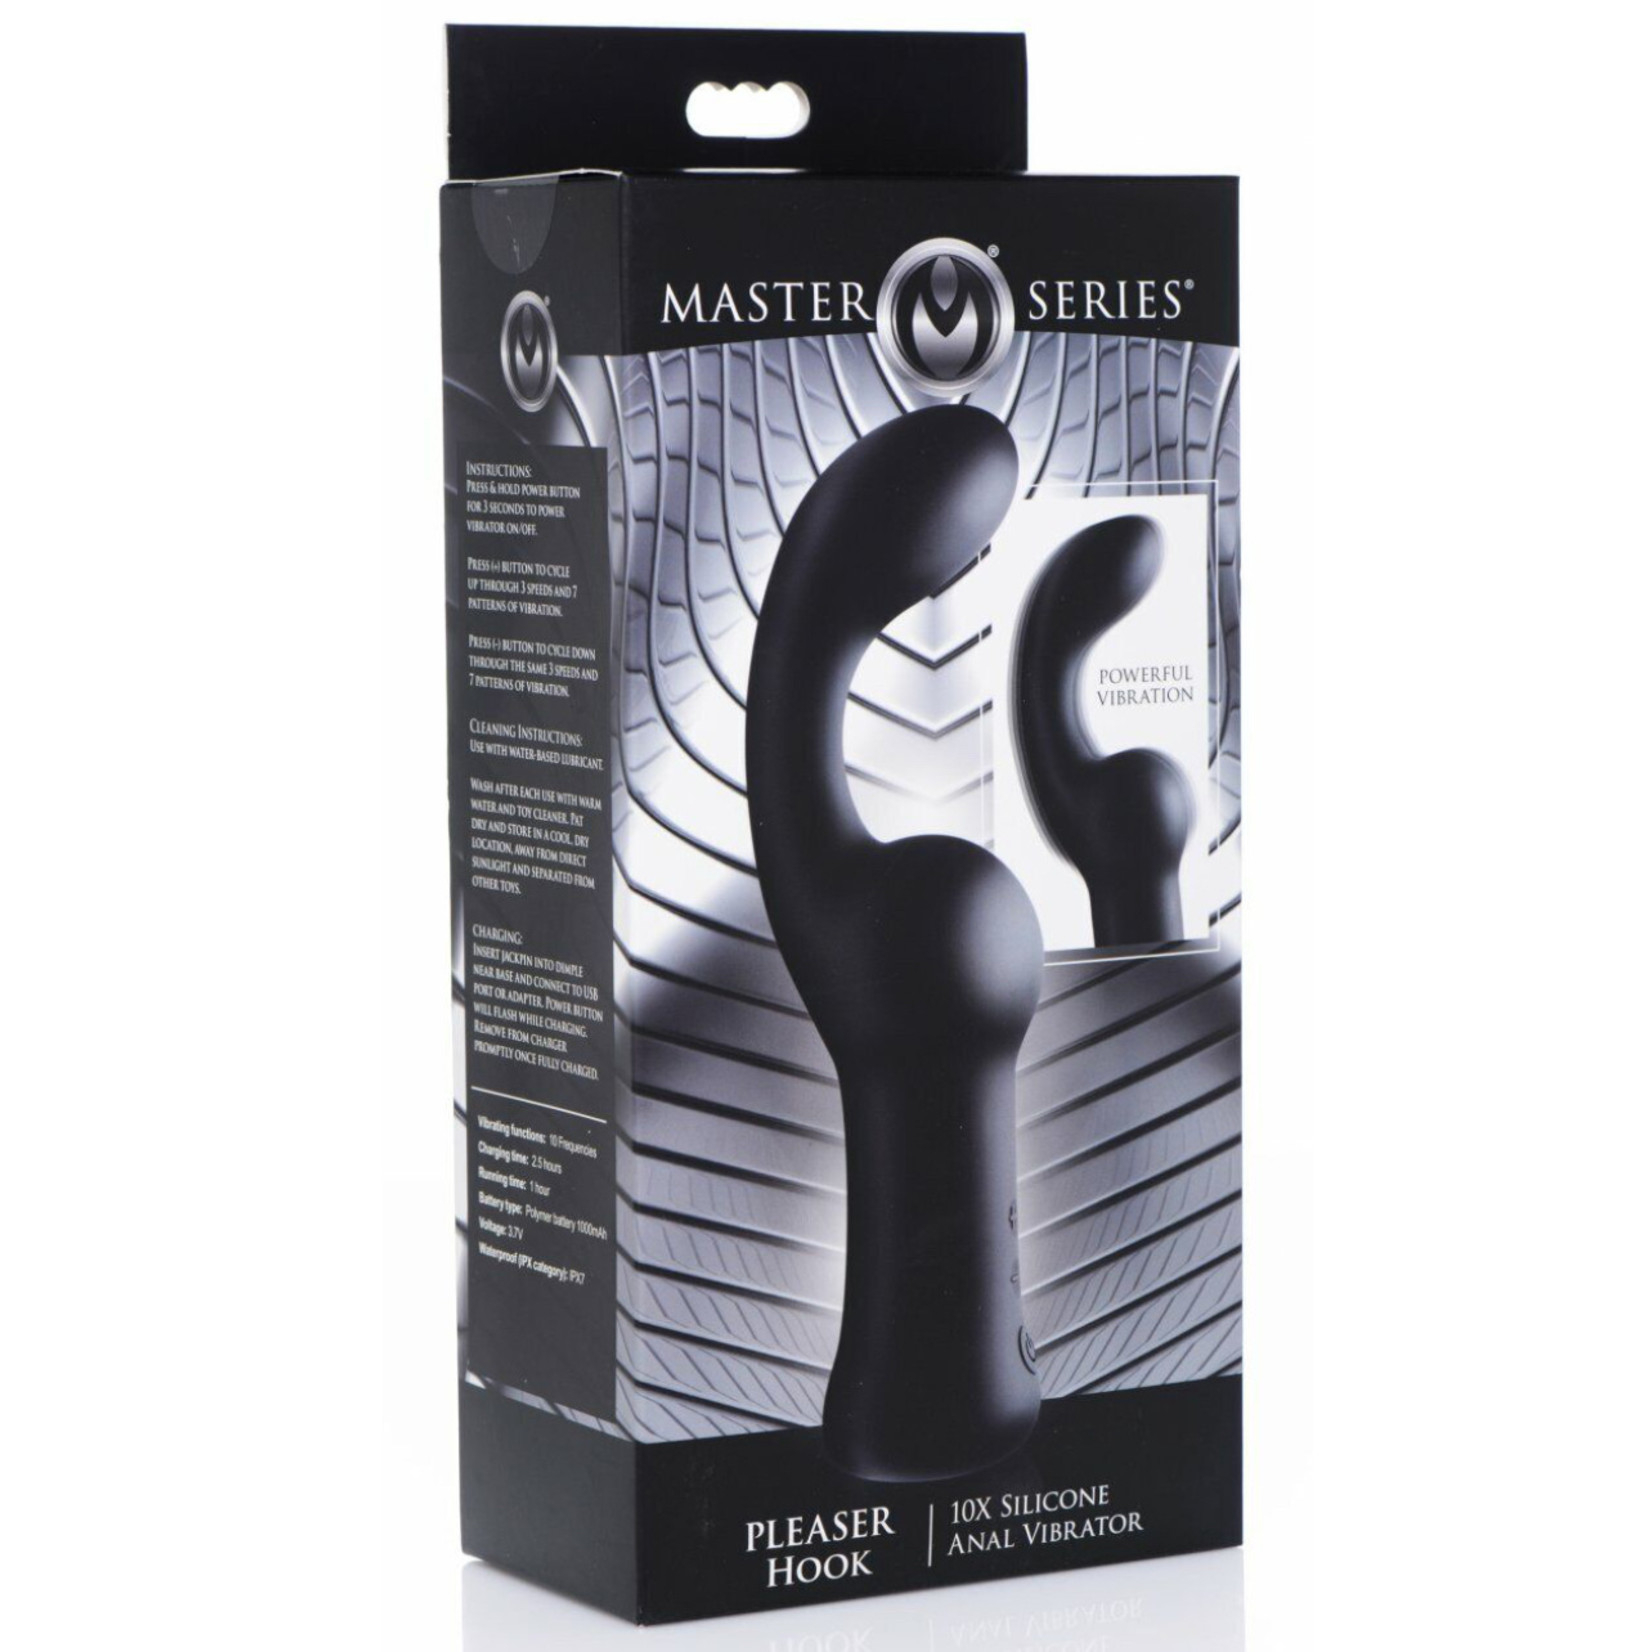 Master Series Master Series - Pleaser Hook - 10x Silicone Anal Vibrator